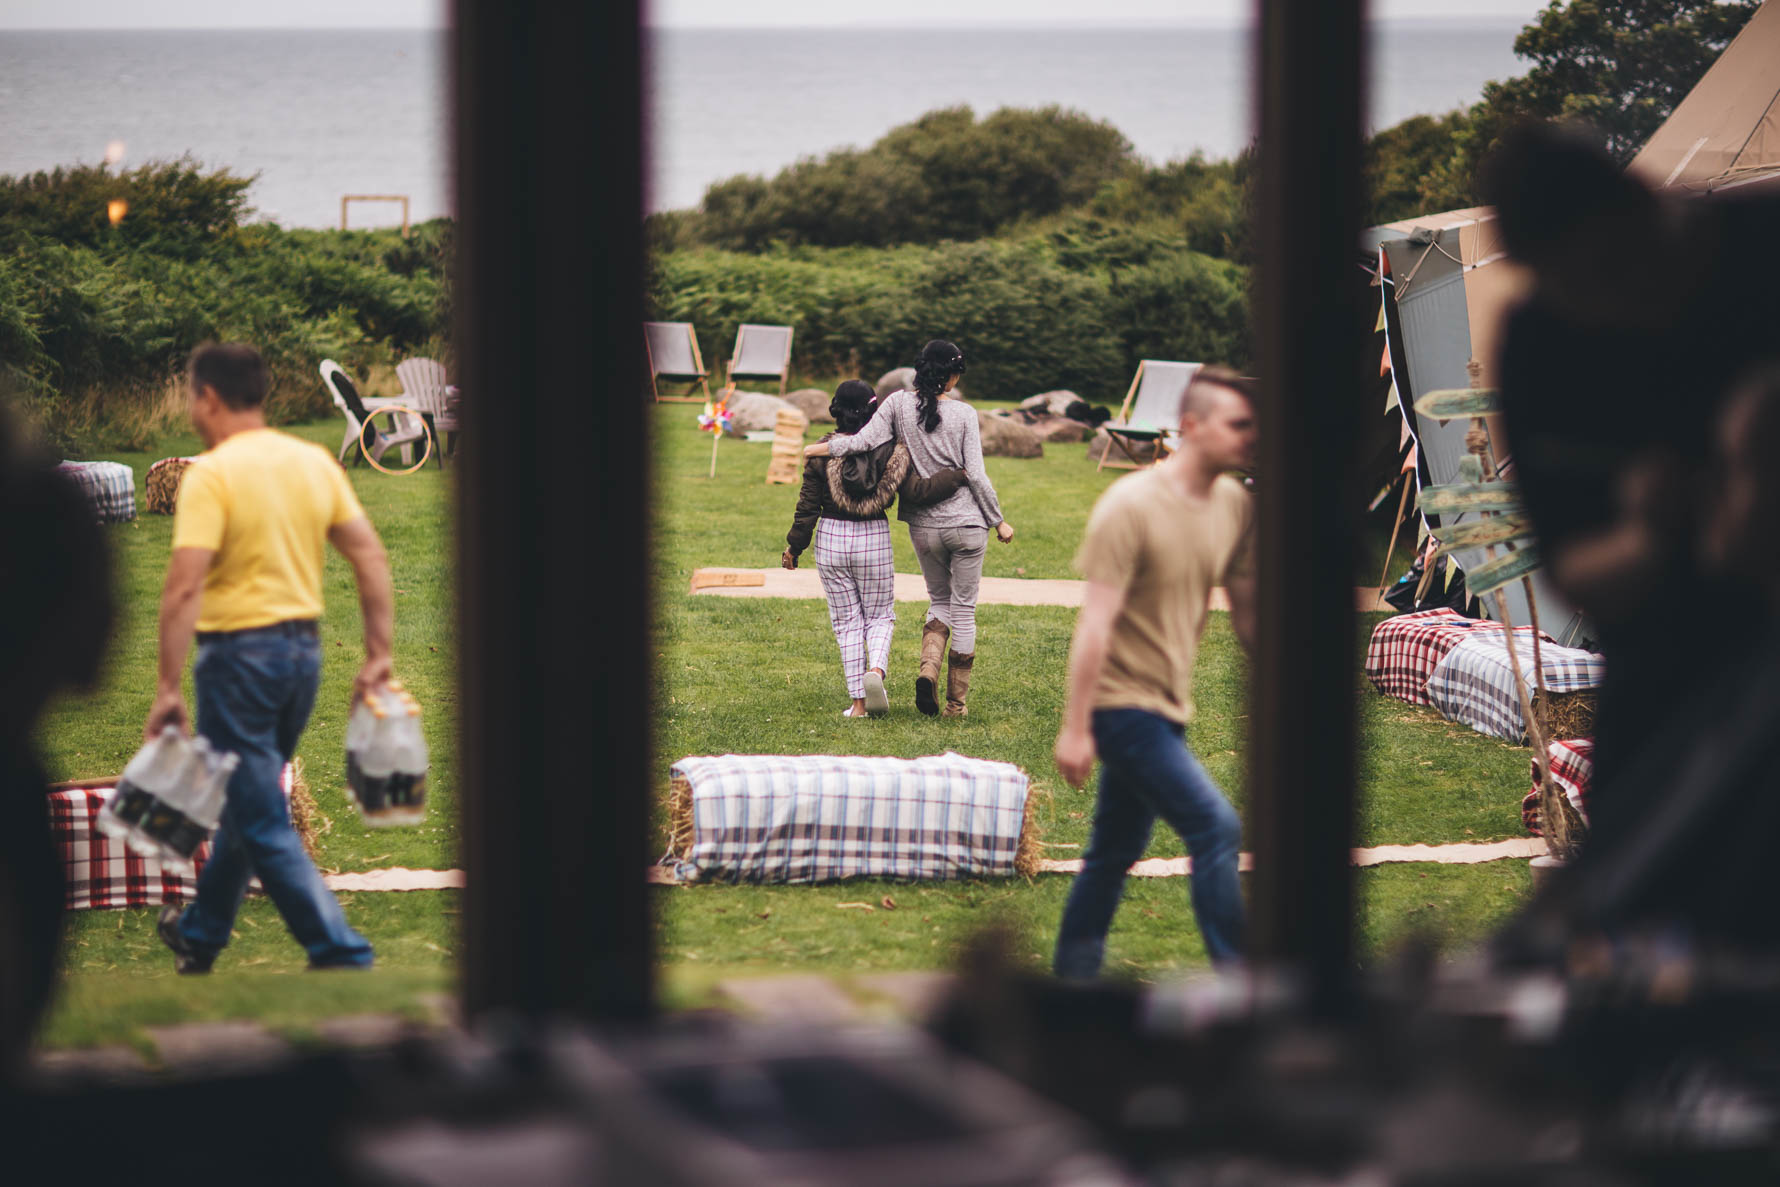 A field surrounded by bushes overlooking the sea with people busy making preparations for a wedding with hay bails covered in checked fabric for seating, deckchairs and bunting